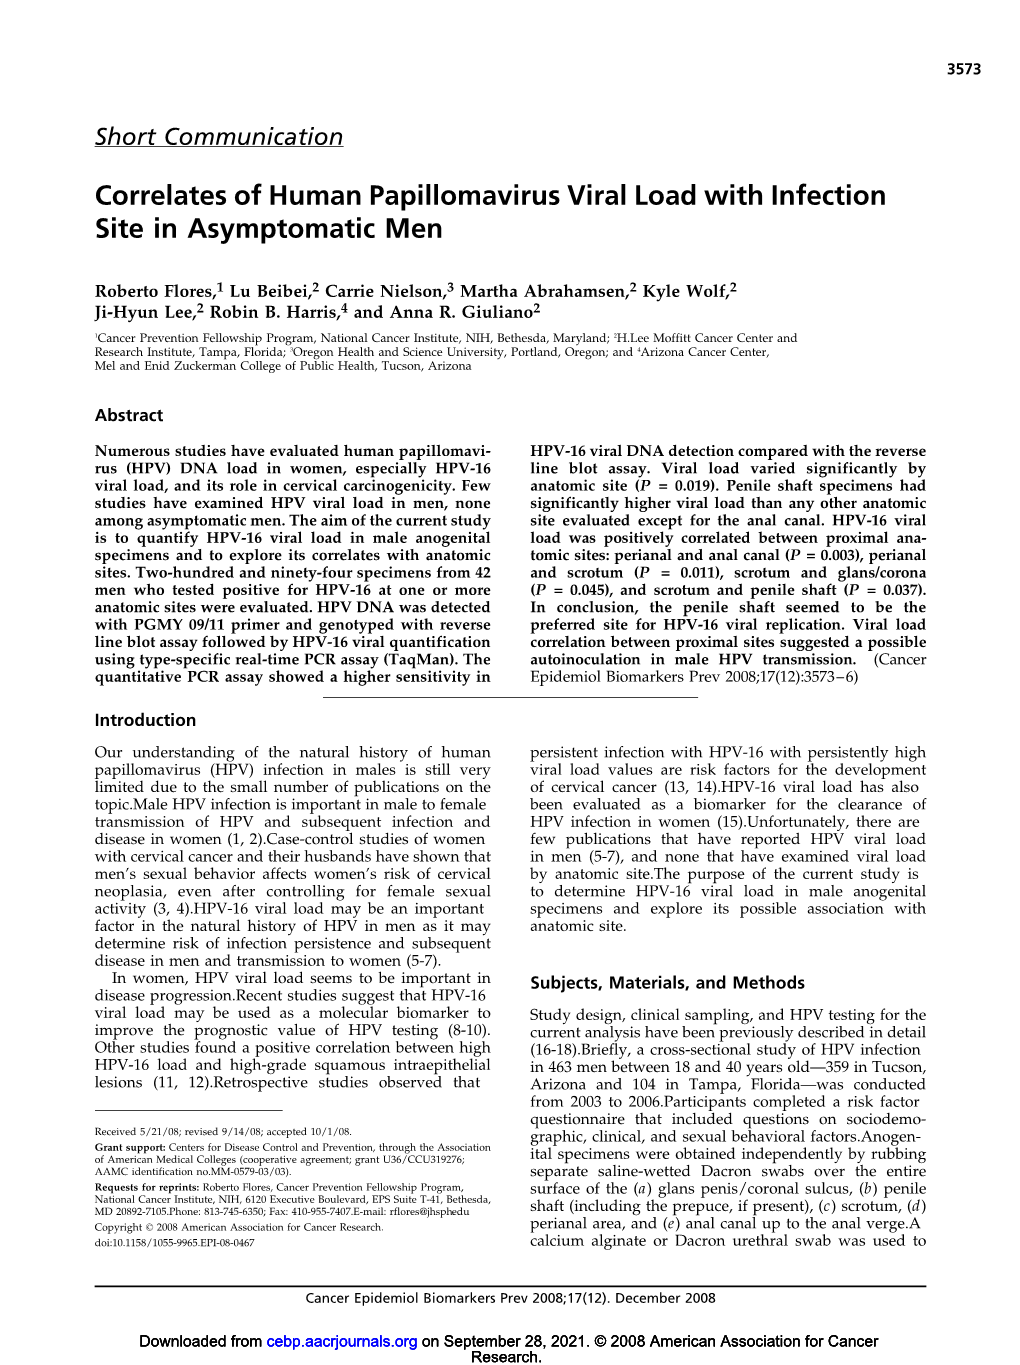 Correlates of Human Papillomavirus Viral Load with Infection Site in Asymptomatic Men